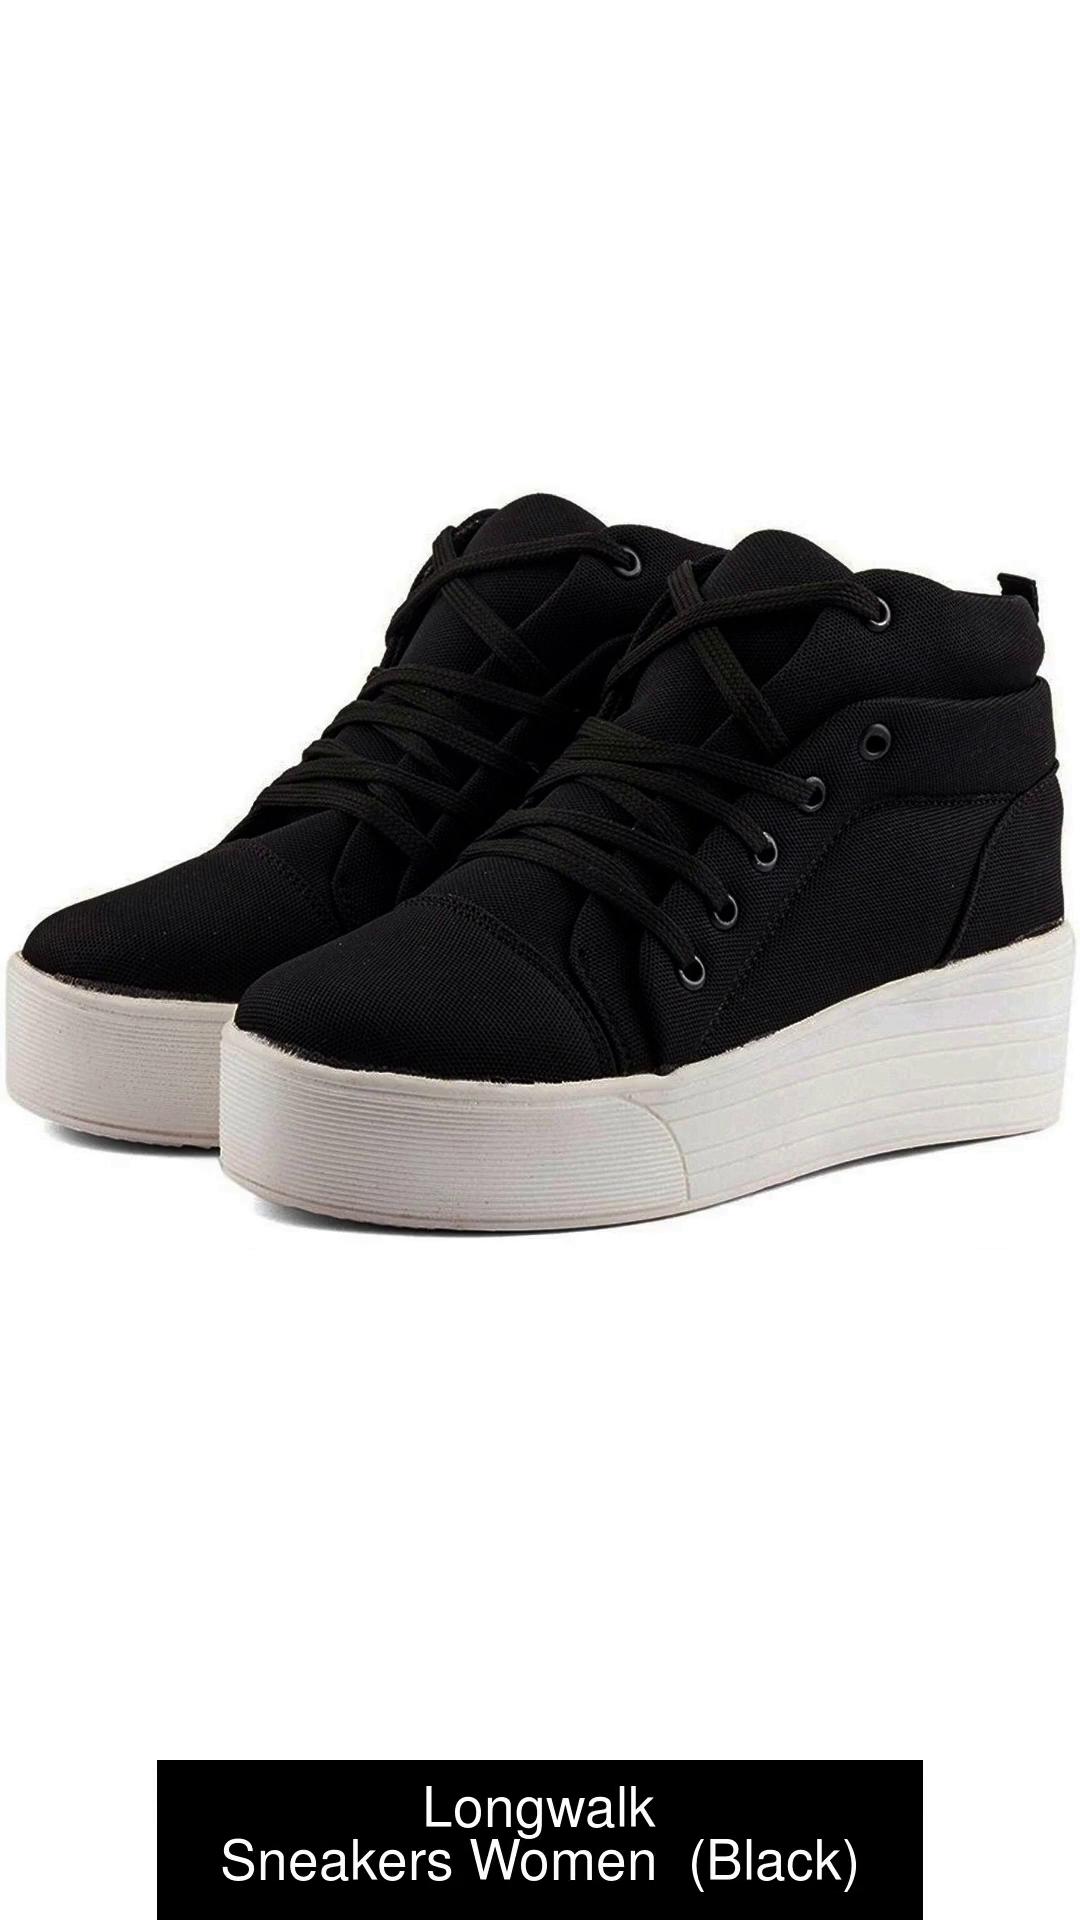 Discover more than 146 high sneakers shoes womens